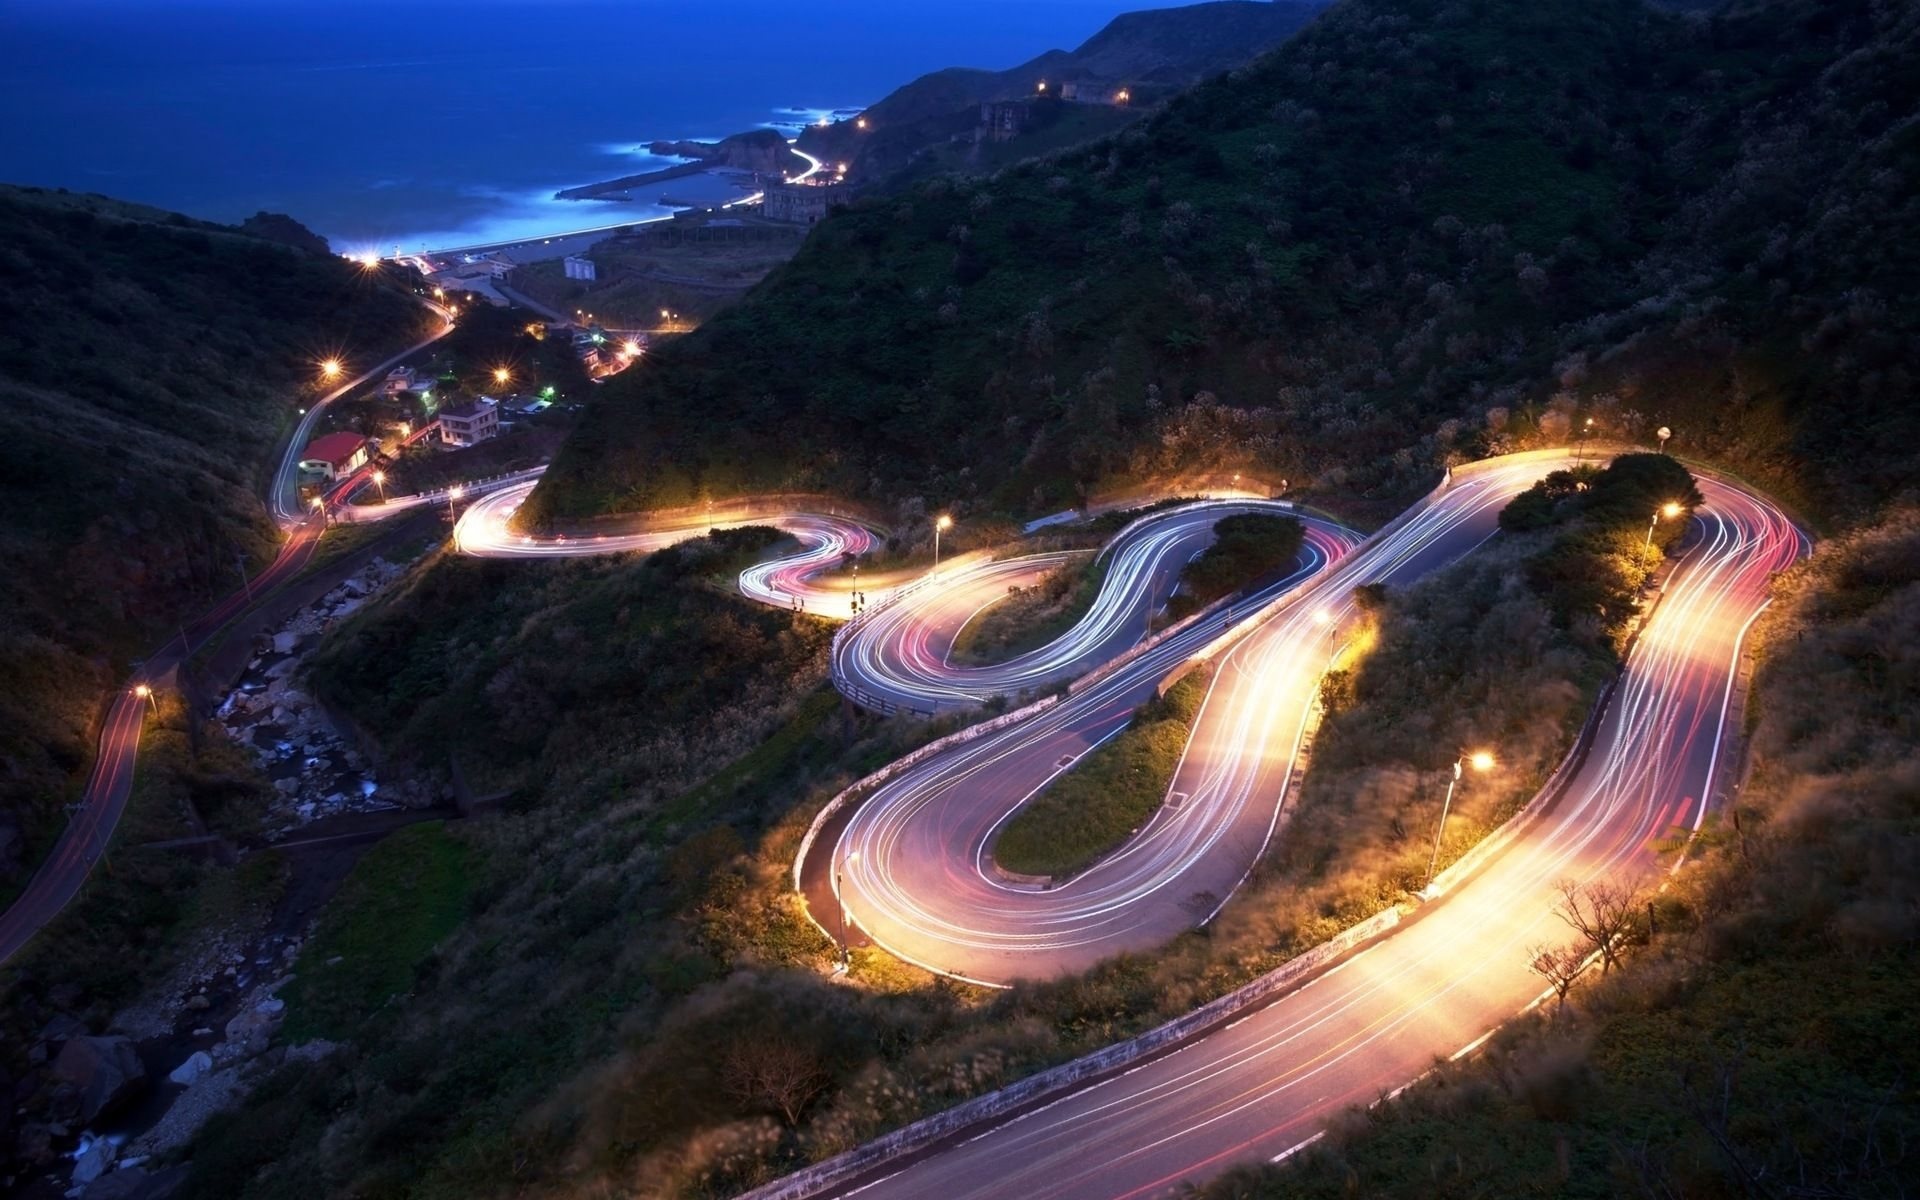 Wallpaper Bend Along The Tortuous Downhill Road At - Light Trails On Mountain Road - HD Wallpaper 